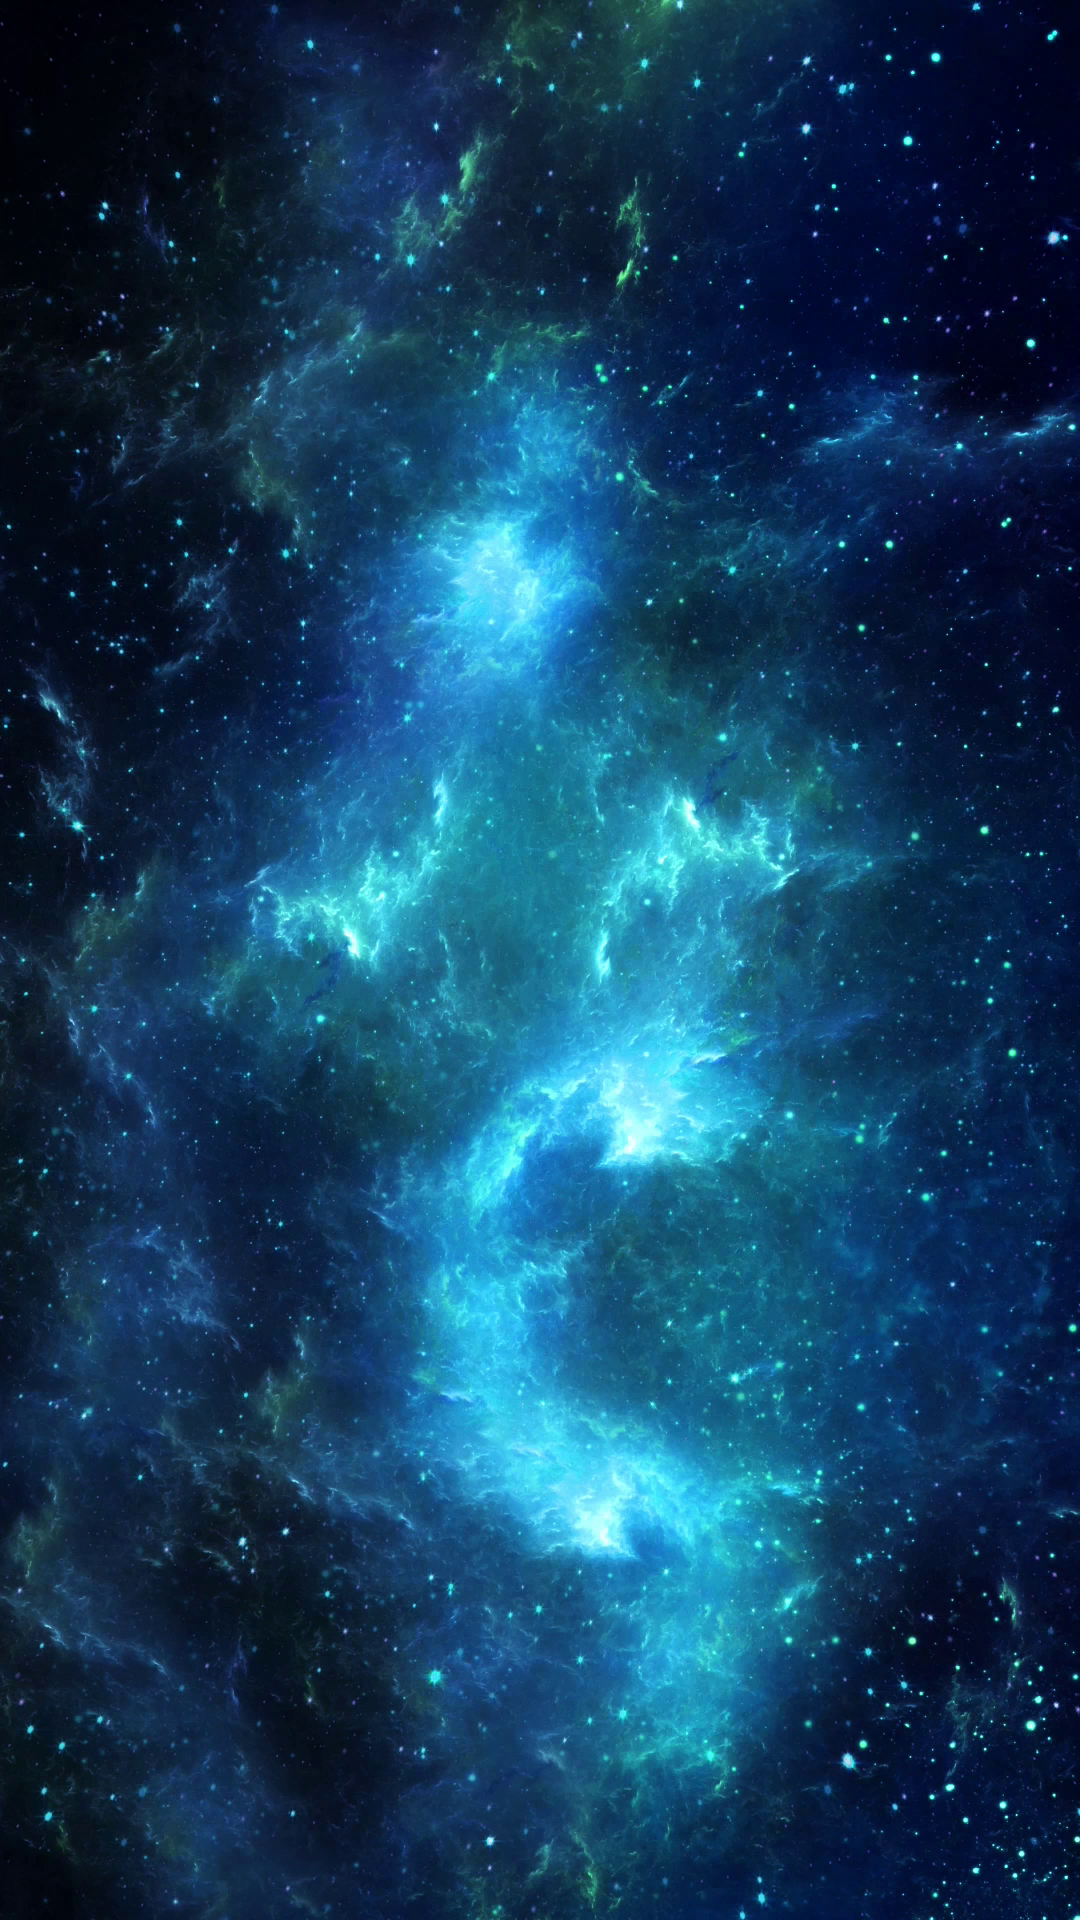 Galaxy [1080x1920] + live wallpaper in comments